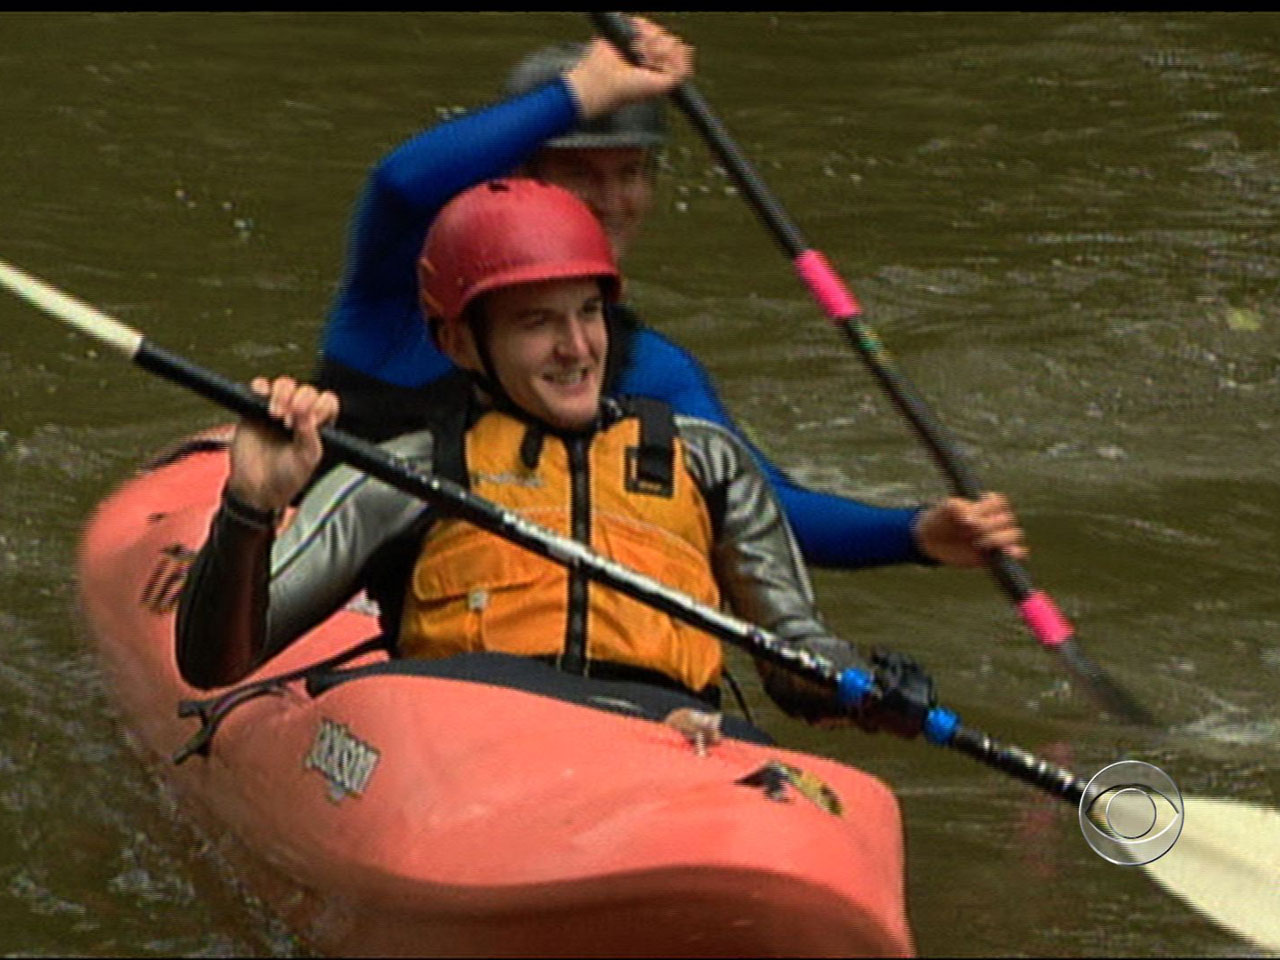 Freeing disabled vets with kayaks - CBS News